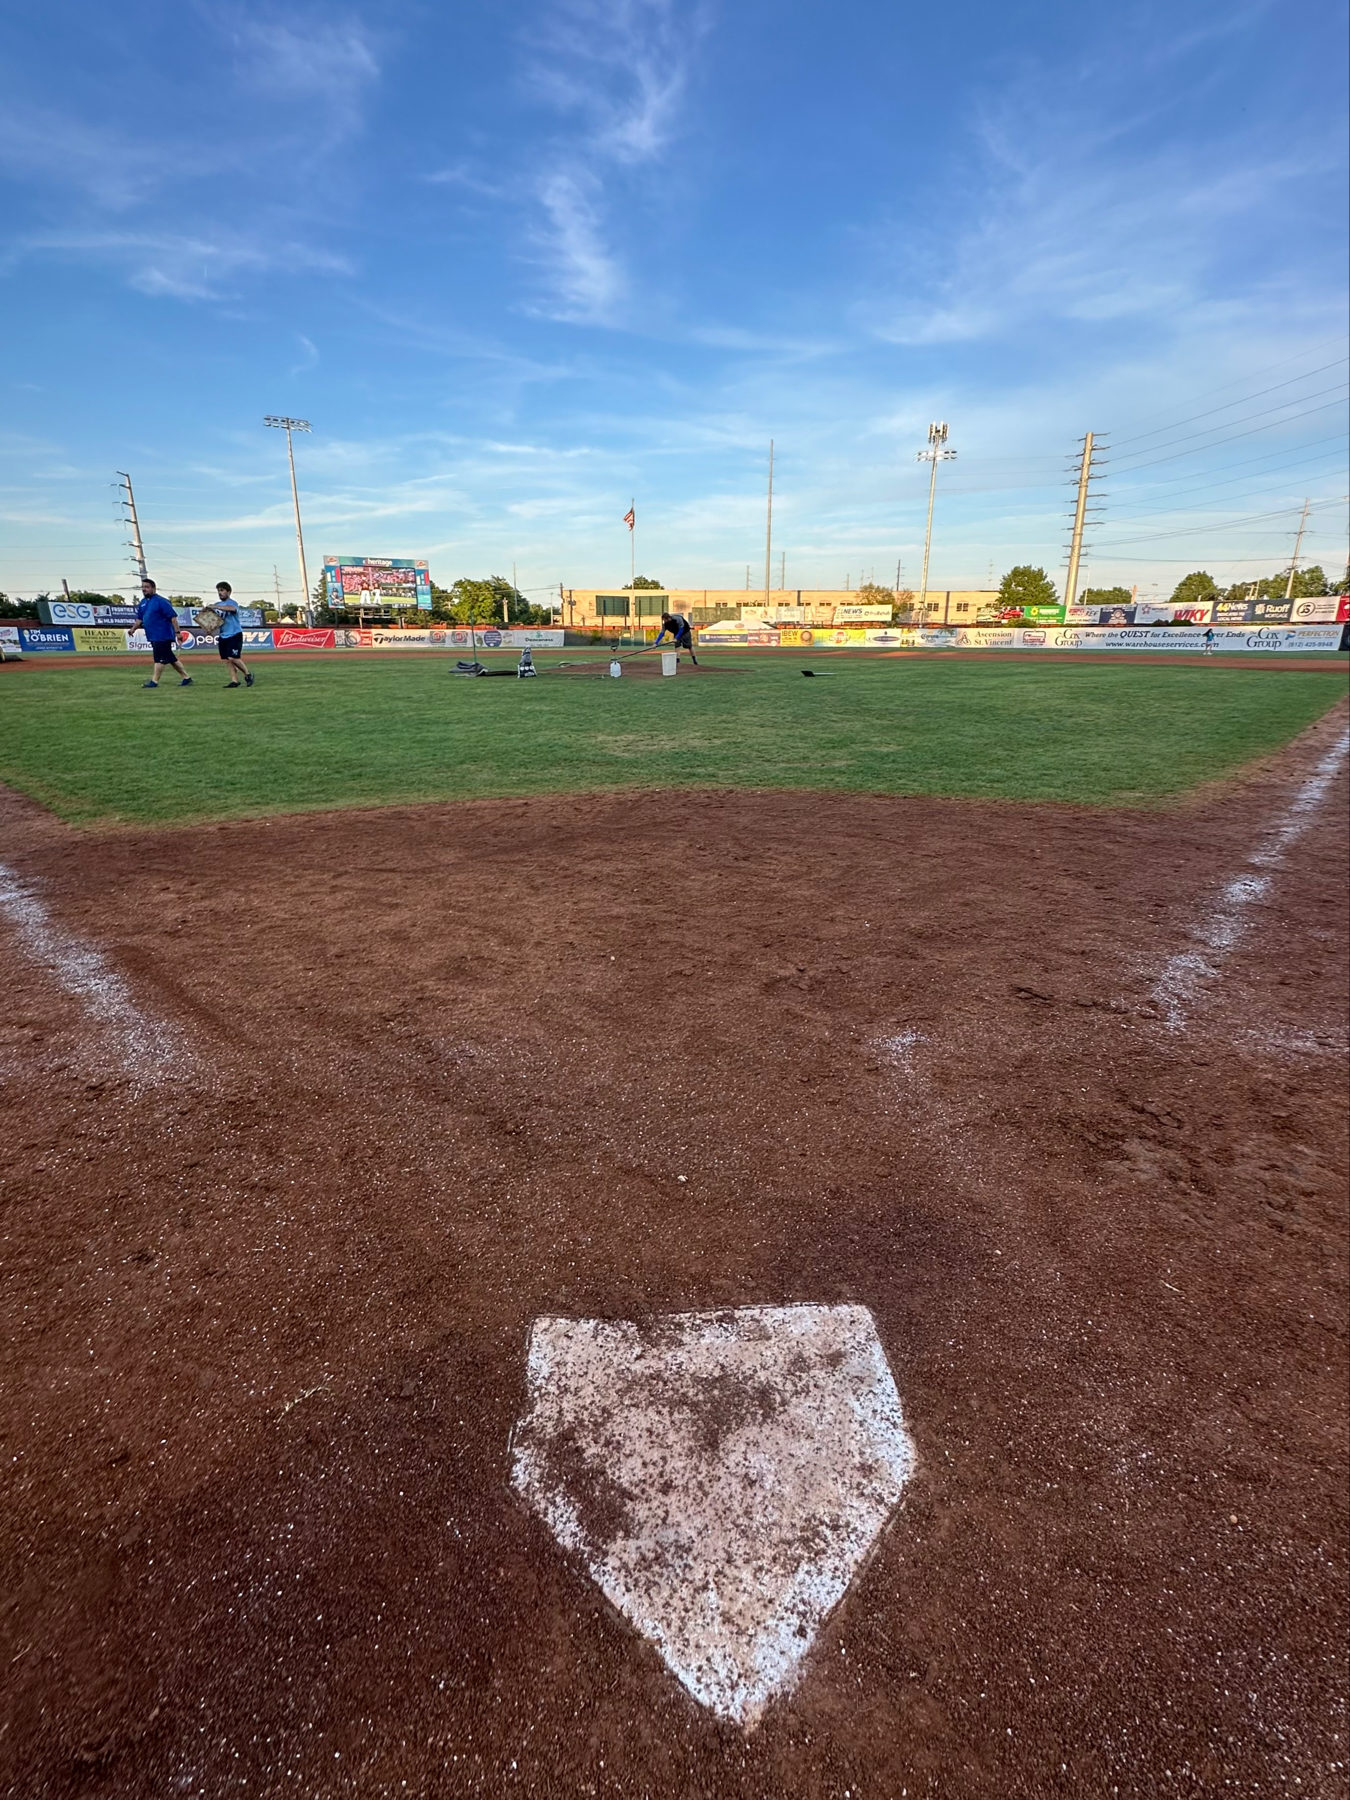 A baseball field viewed from behind home plate. The infield dirt is prominent, and the green outfield stretches towards the horizon. Several players are seen near the pitcher’s mound, engaging in pre-game activities. The sky is clear with a few wis